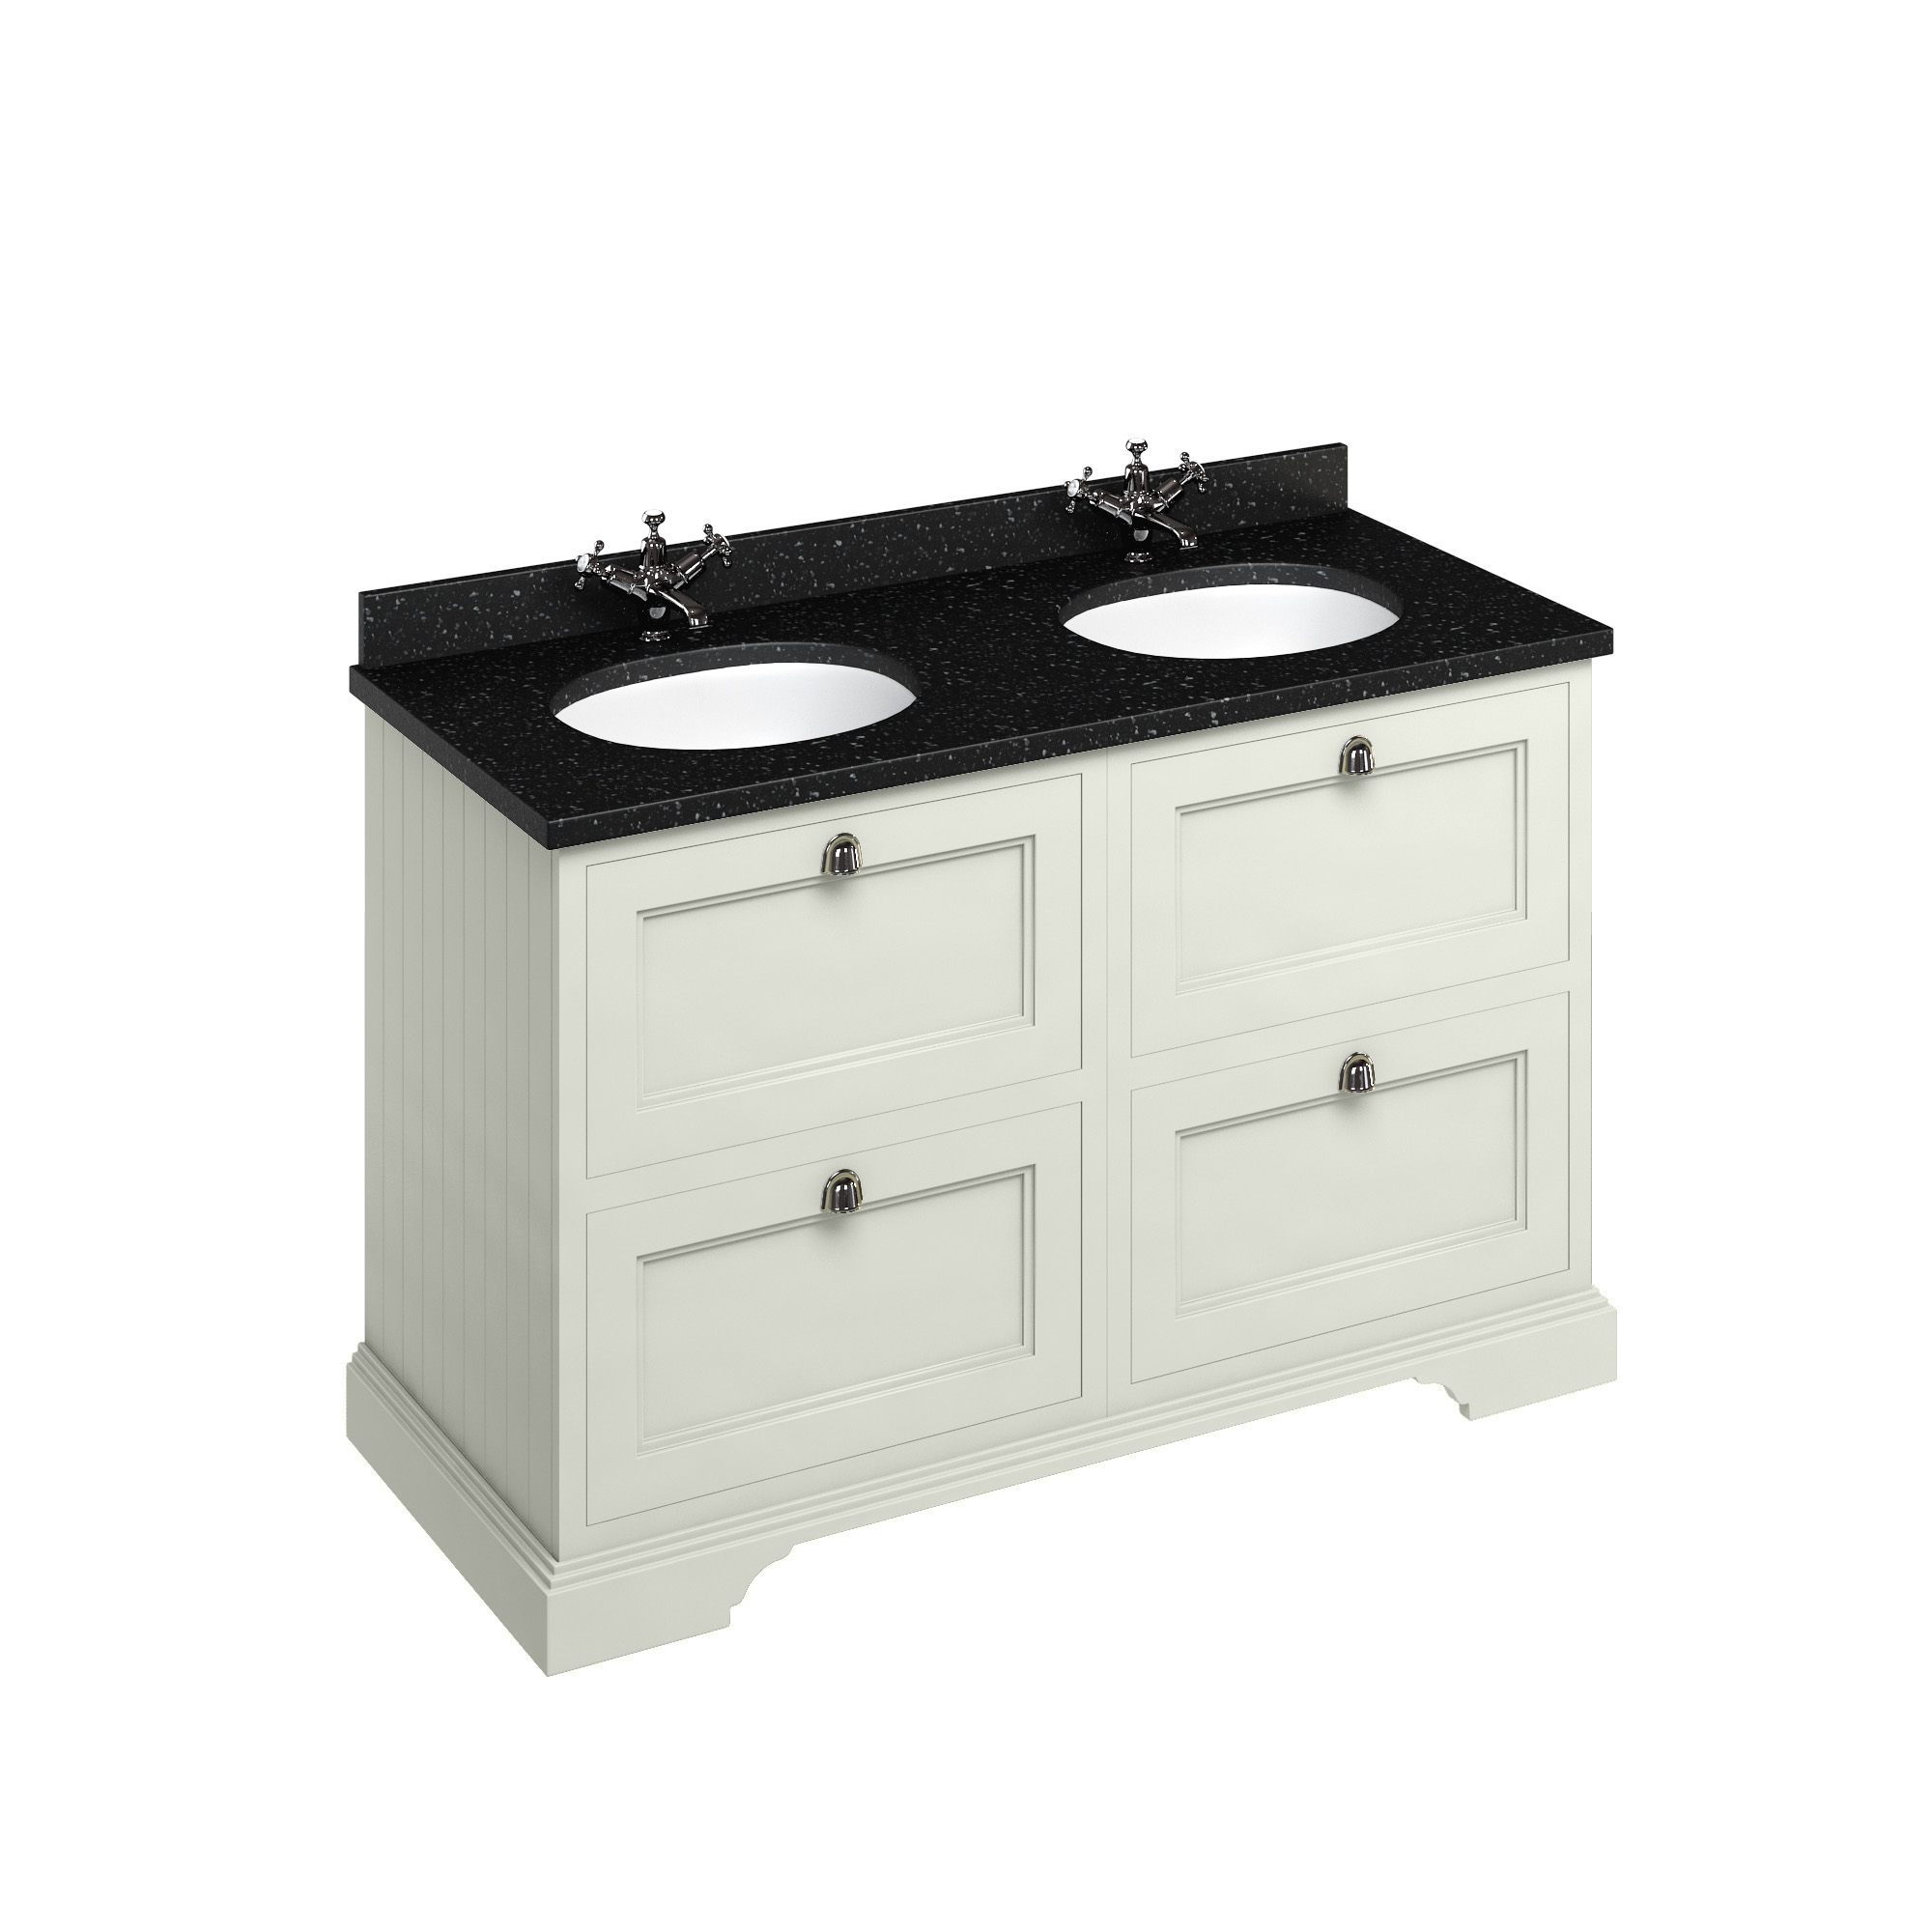 Freestanding 130 Vanity Unit with drawers - Sand and Minerva black granite worktop with two integrated white basins